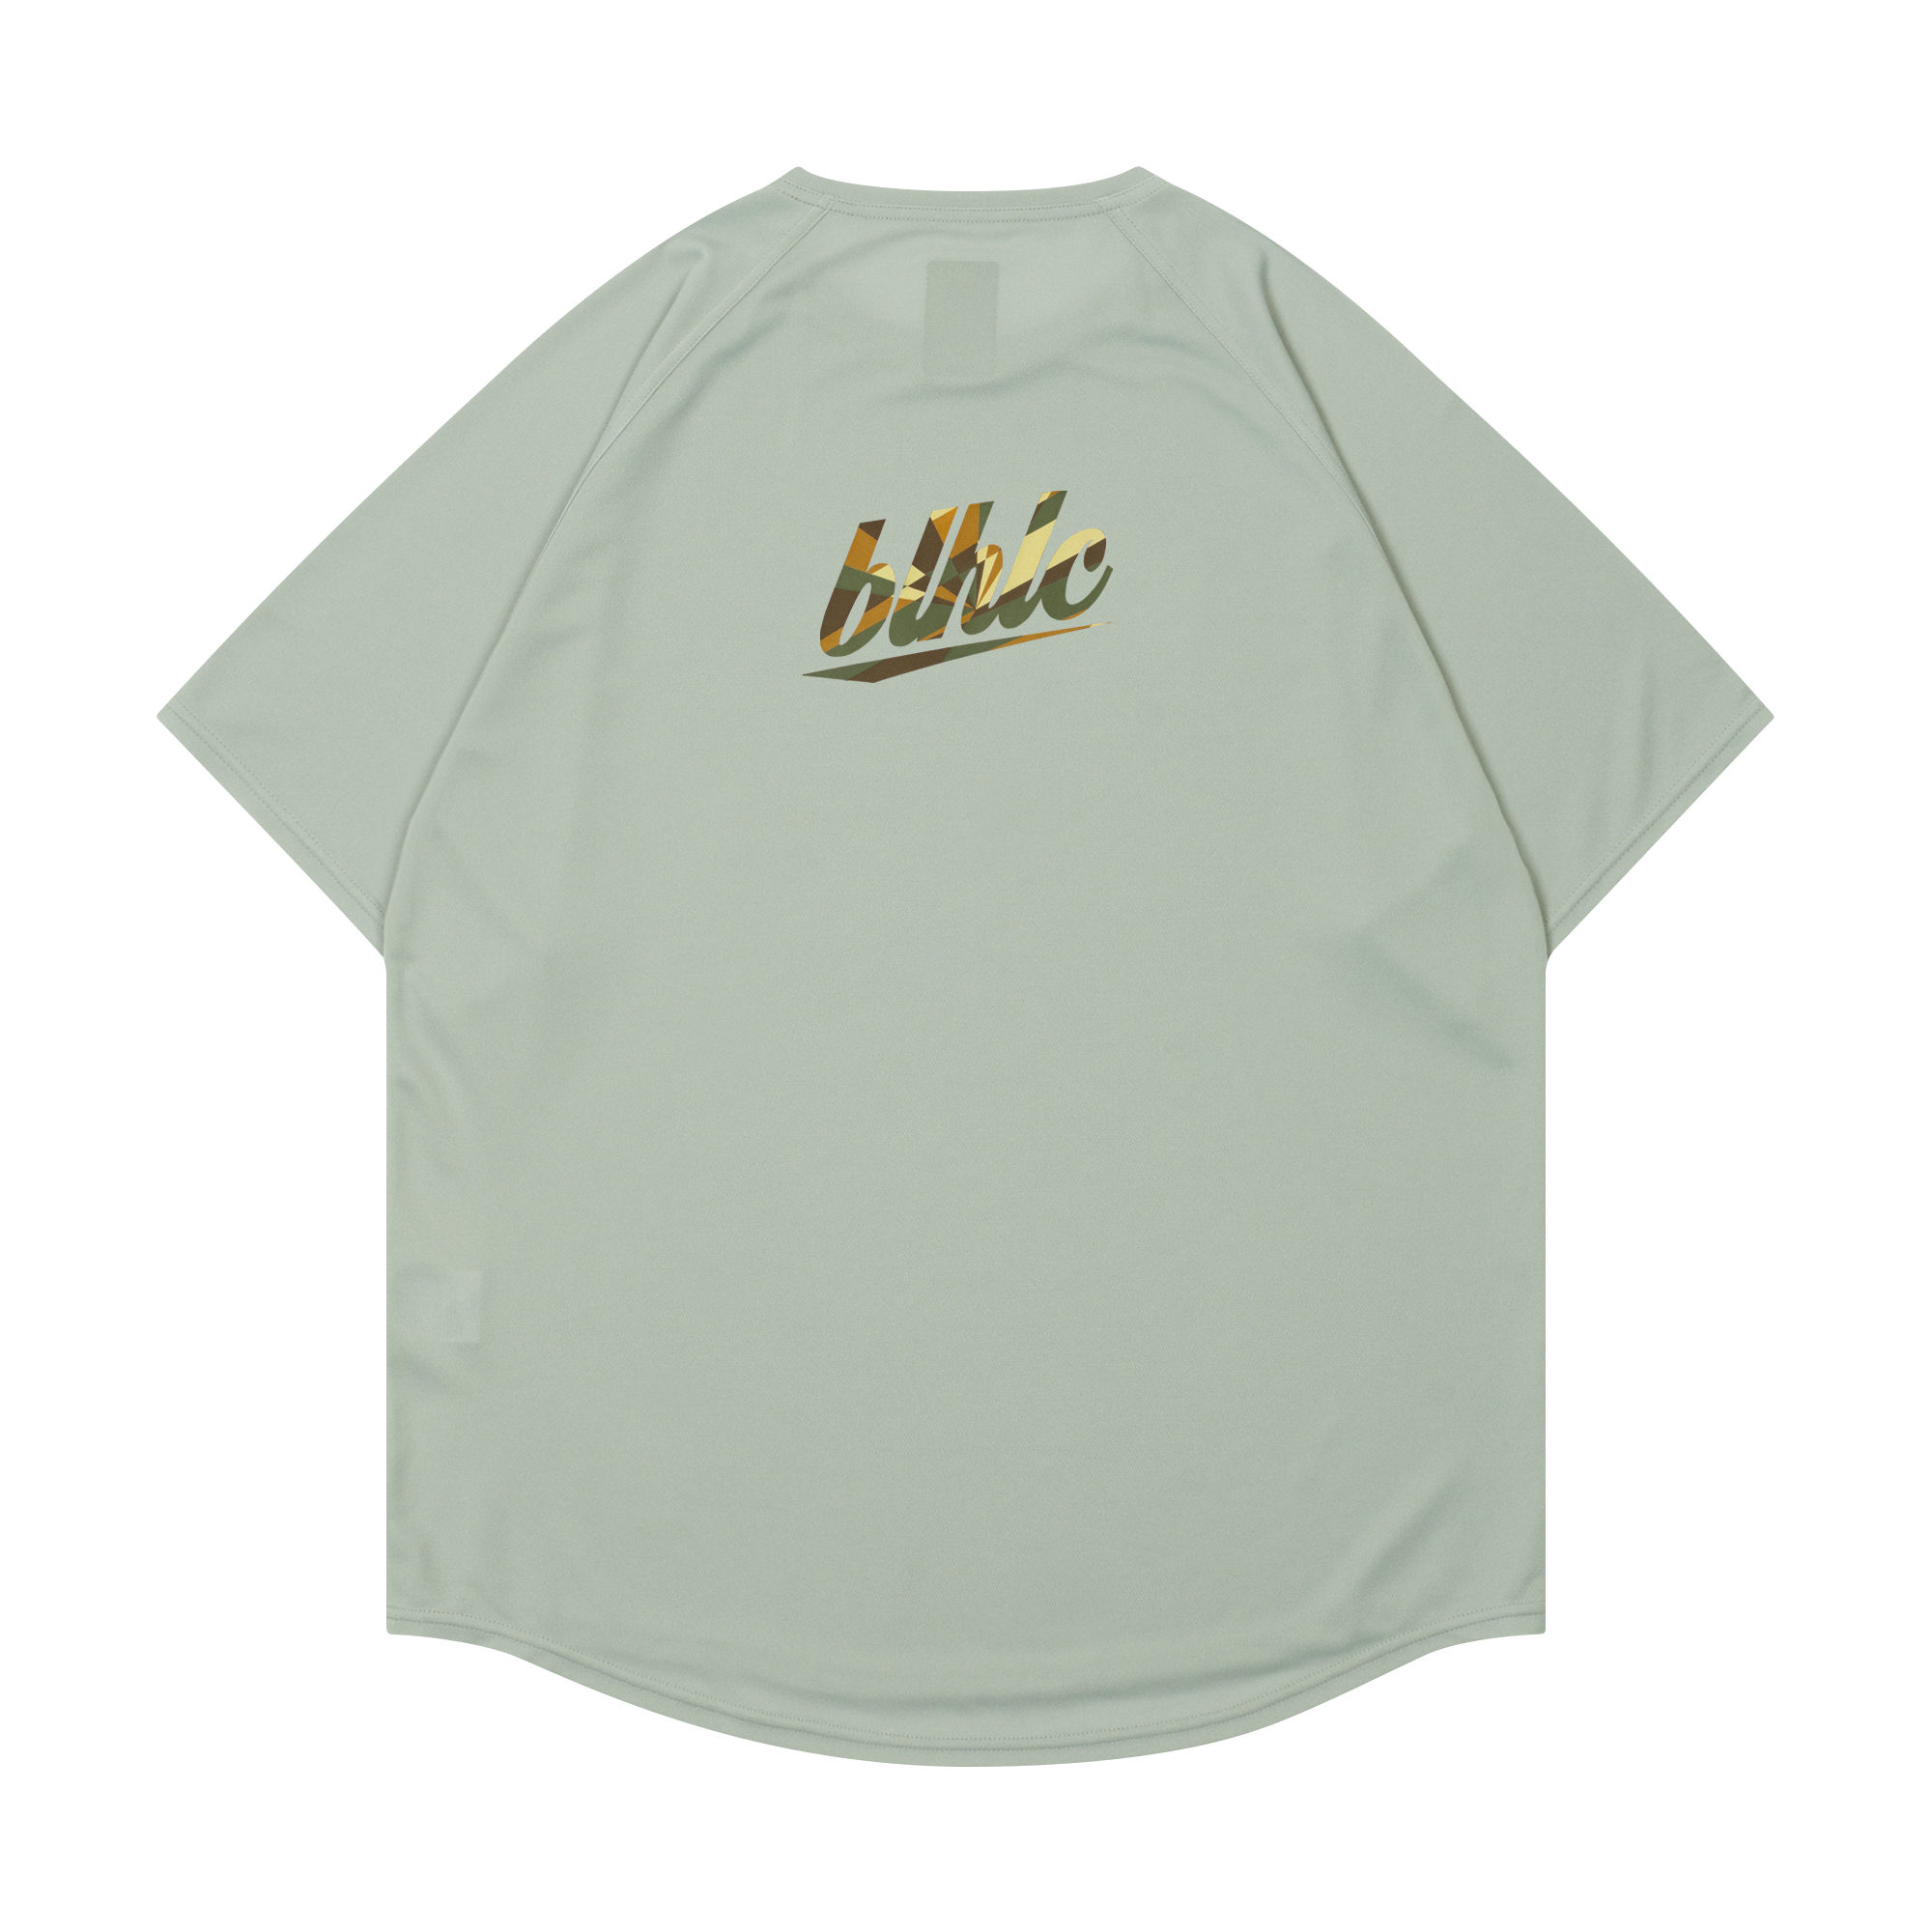 Ballaholic blhlc COOL Tee